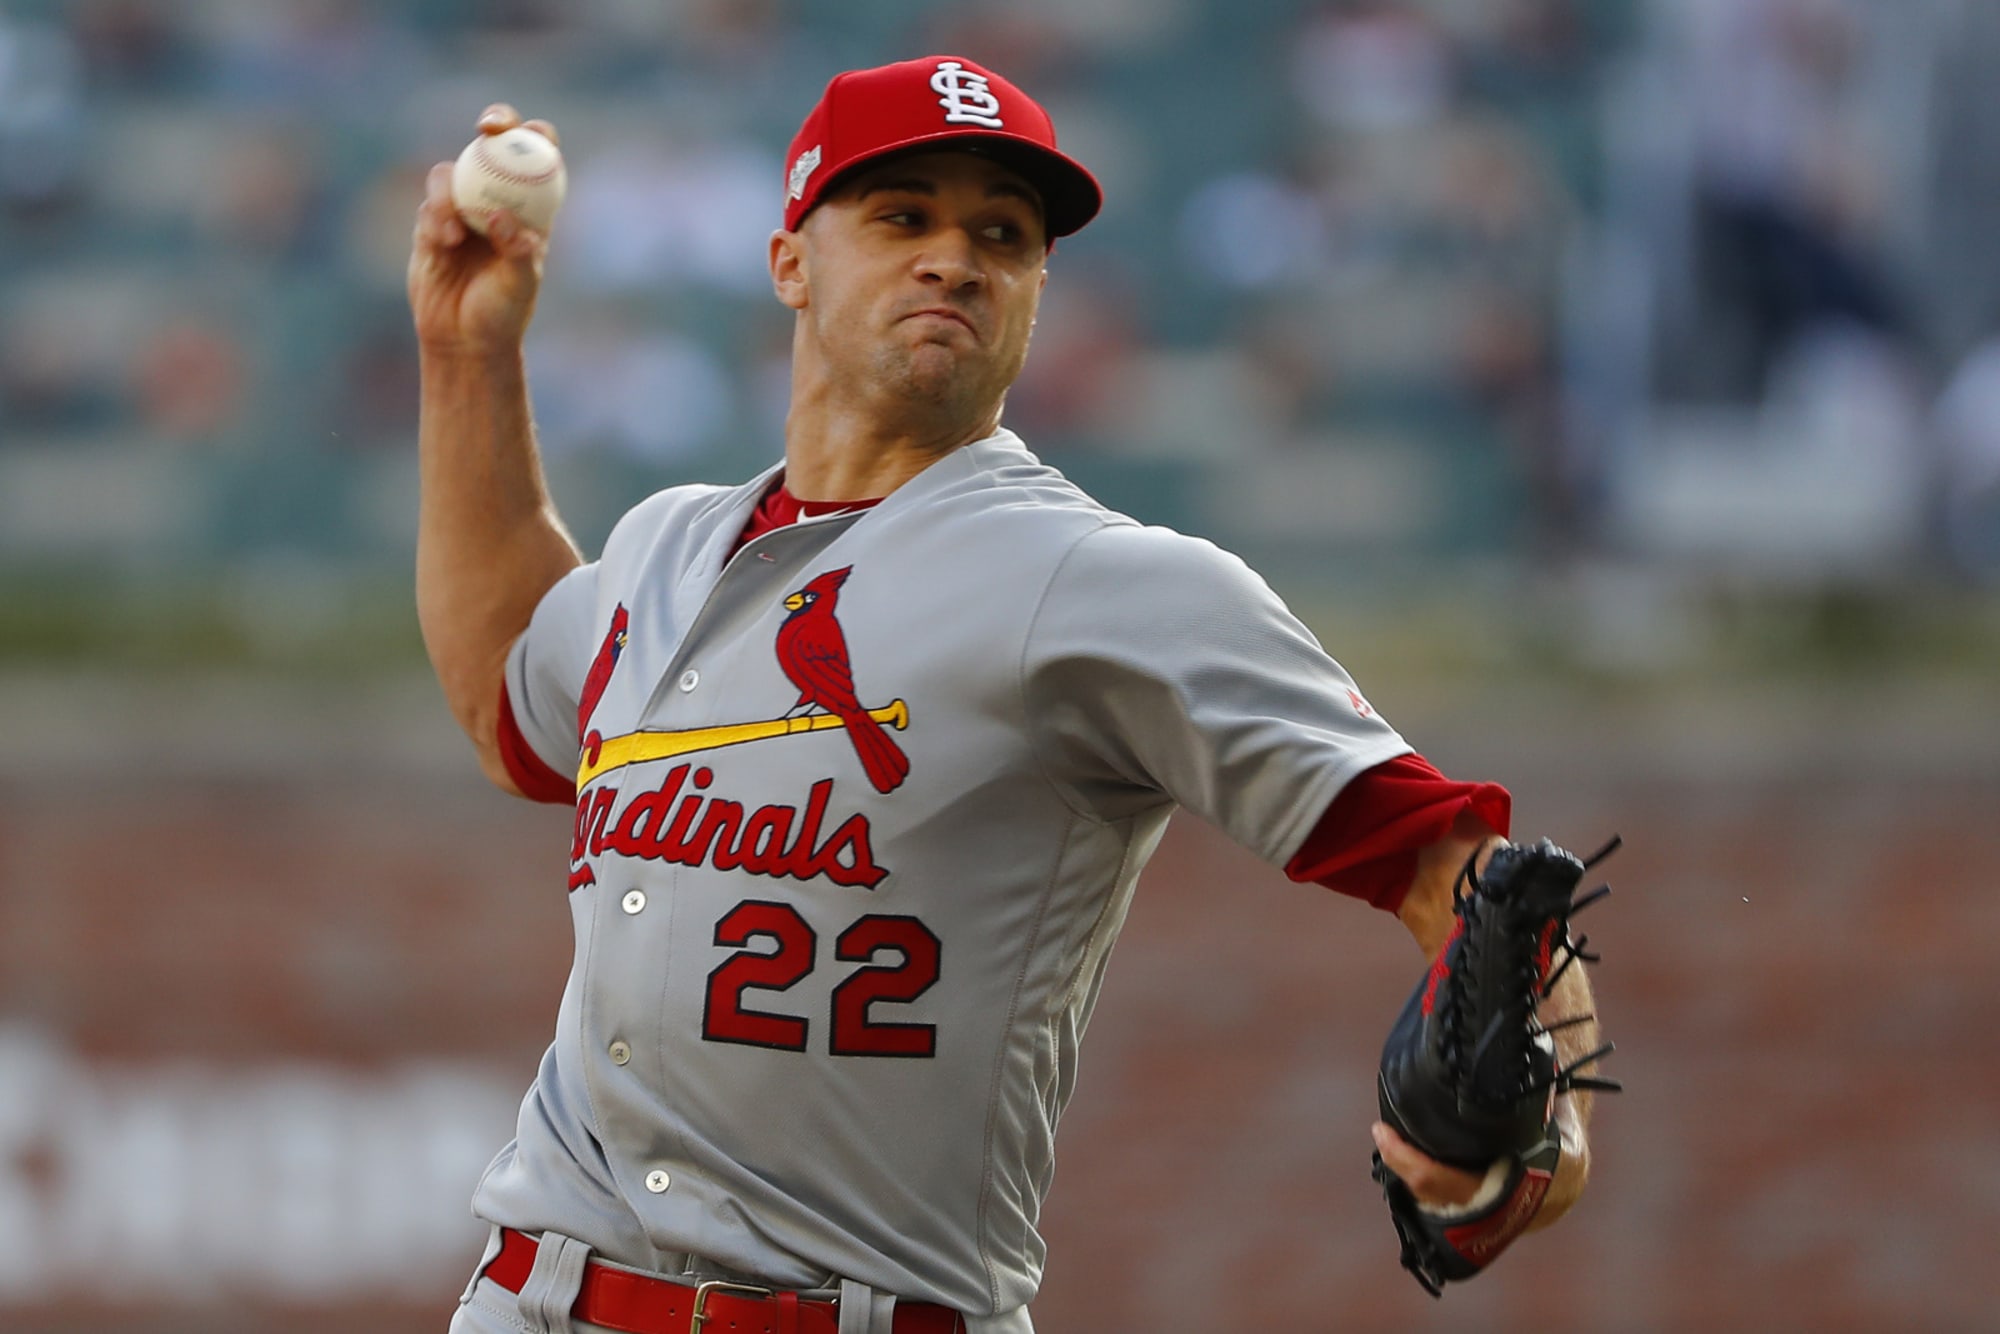 Jack Flaherty faces murky future with St. Louis Cardinals